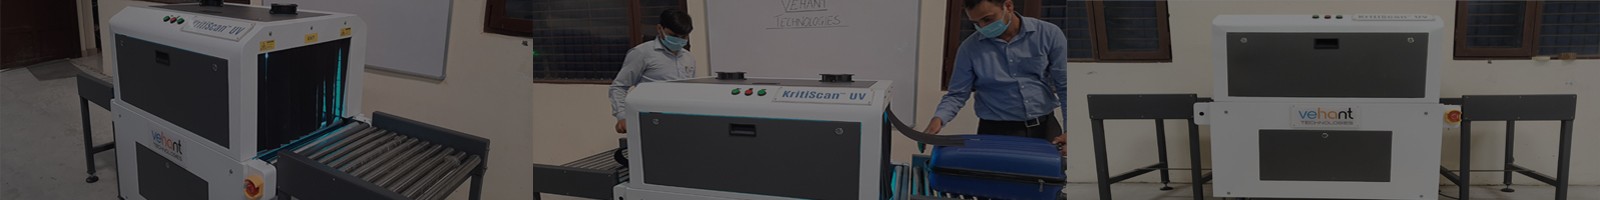 KritiScan® UV - UVC light based Baggage/luggage Disinfection System